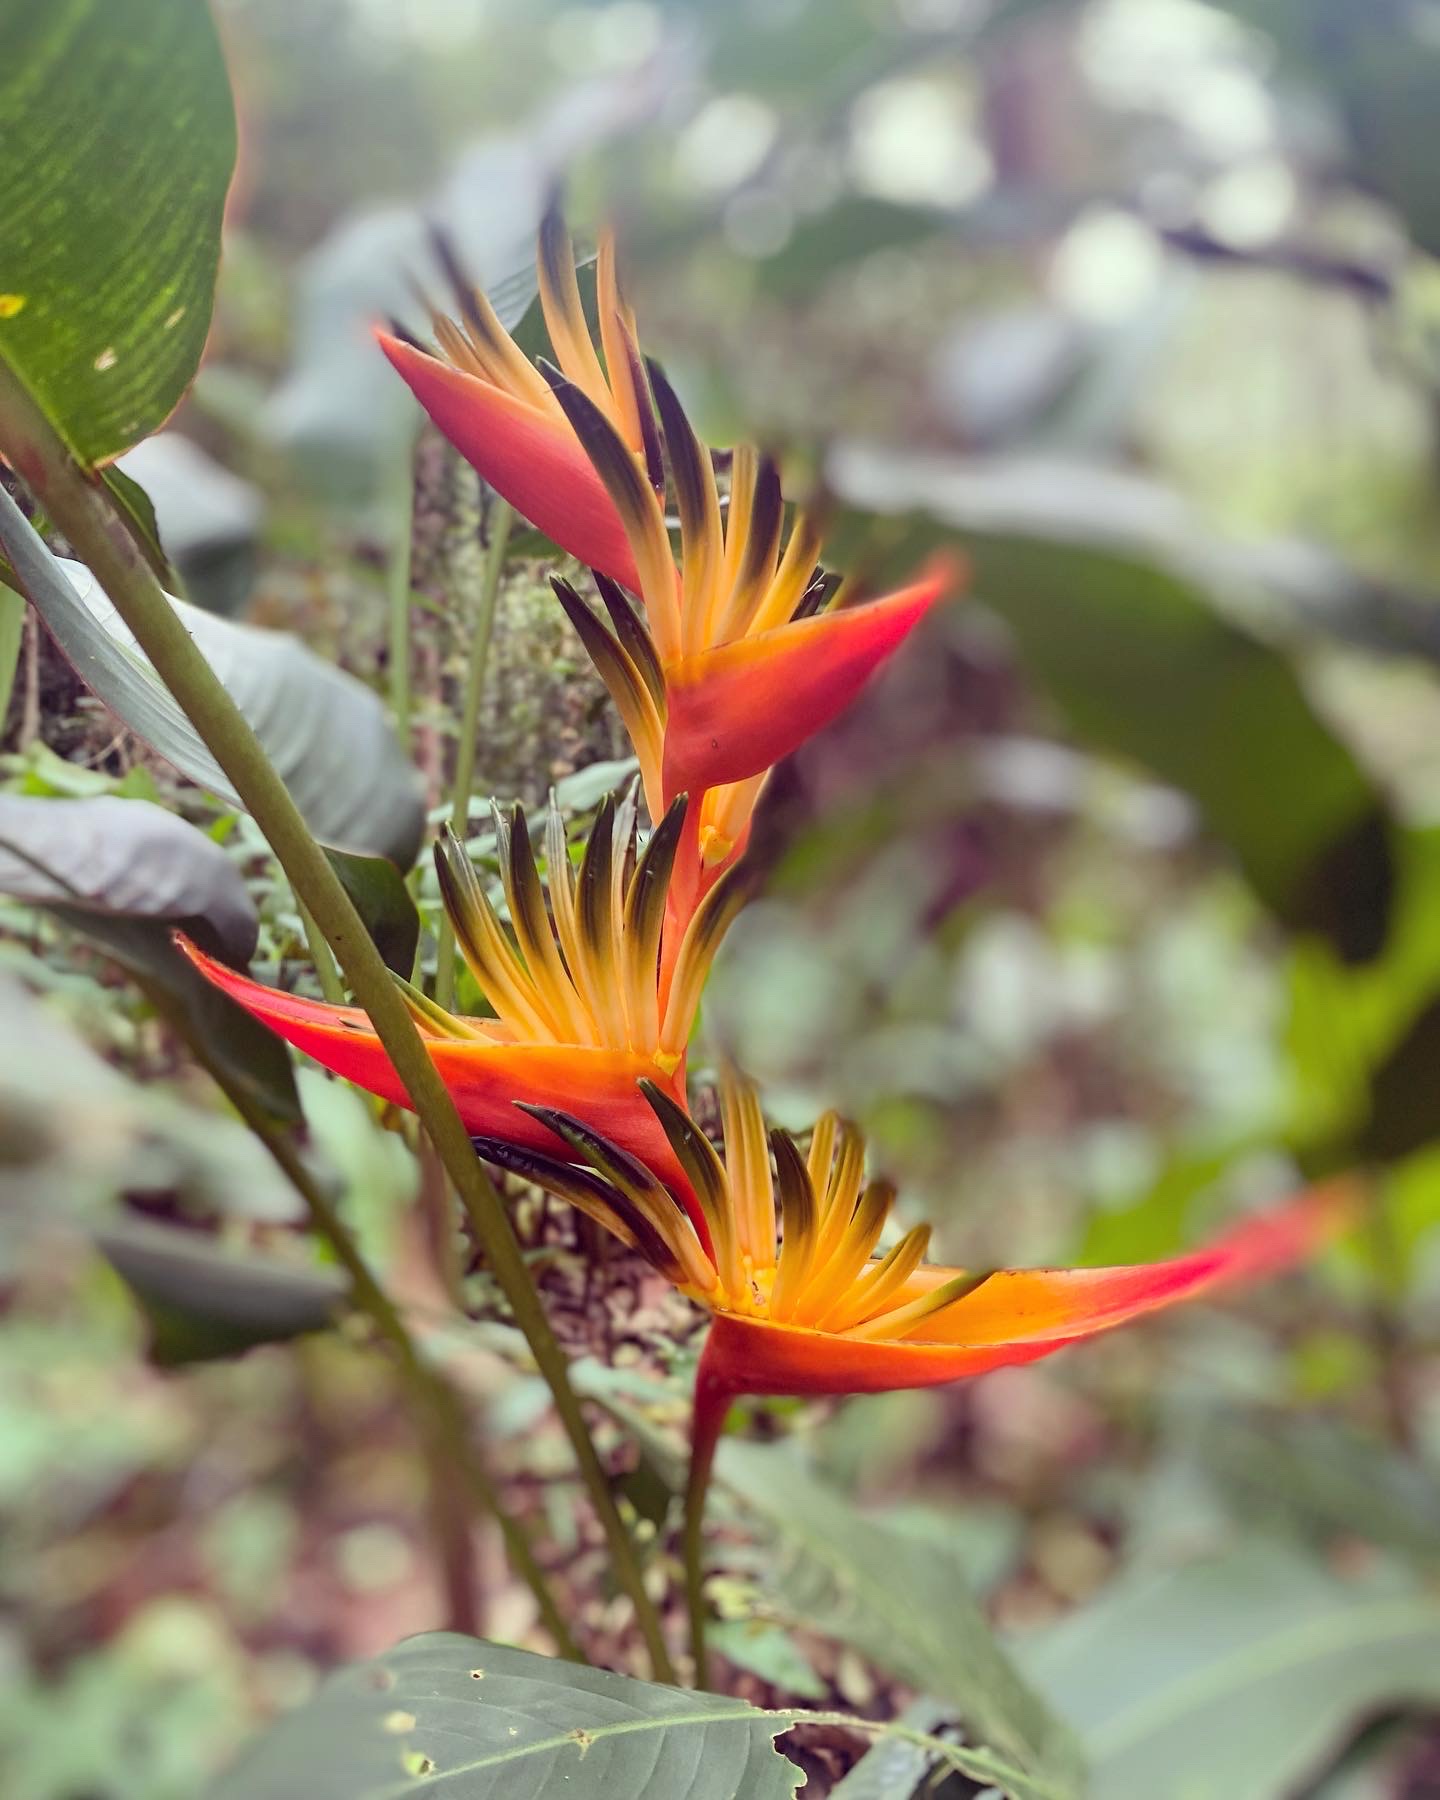 A photograph of Birds of Paradise flowers. They are orange and red